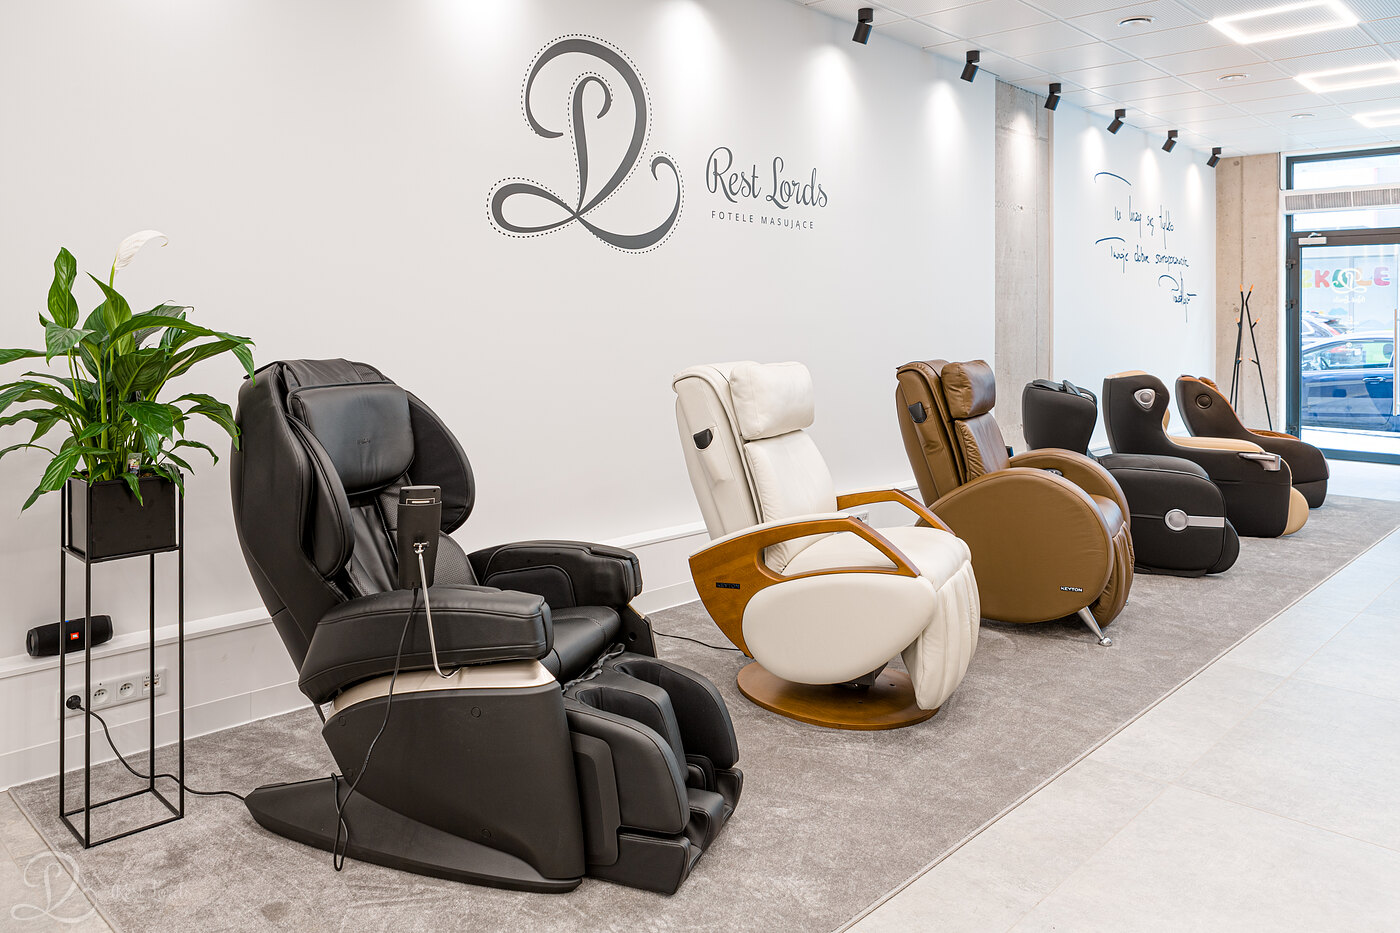 Massage chair salon Rest Lords in Wroclaw